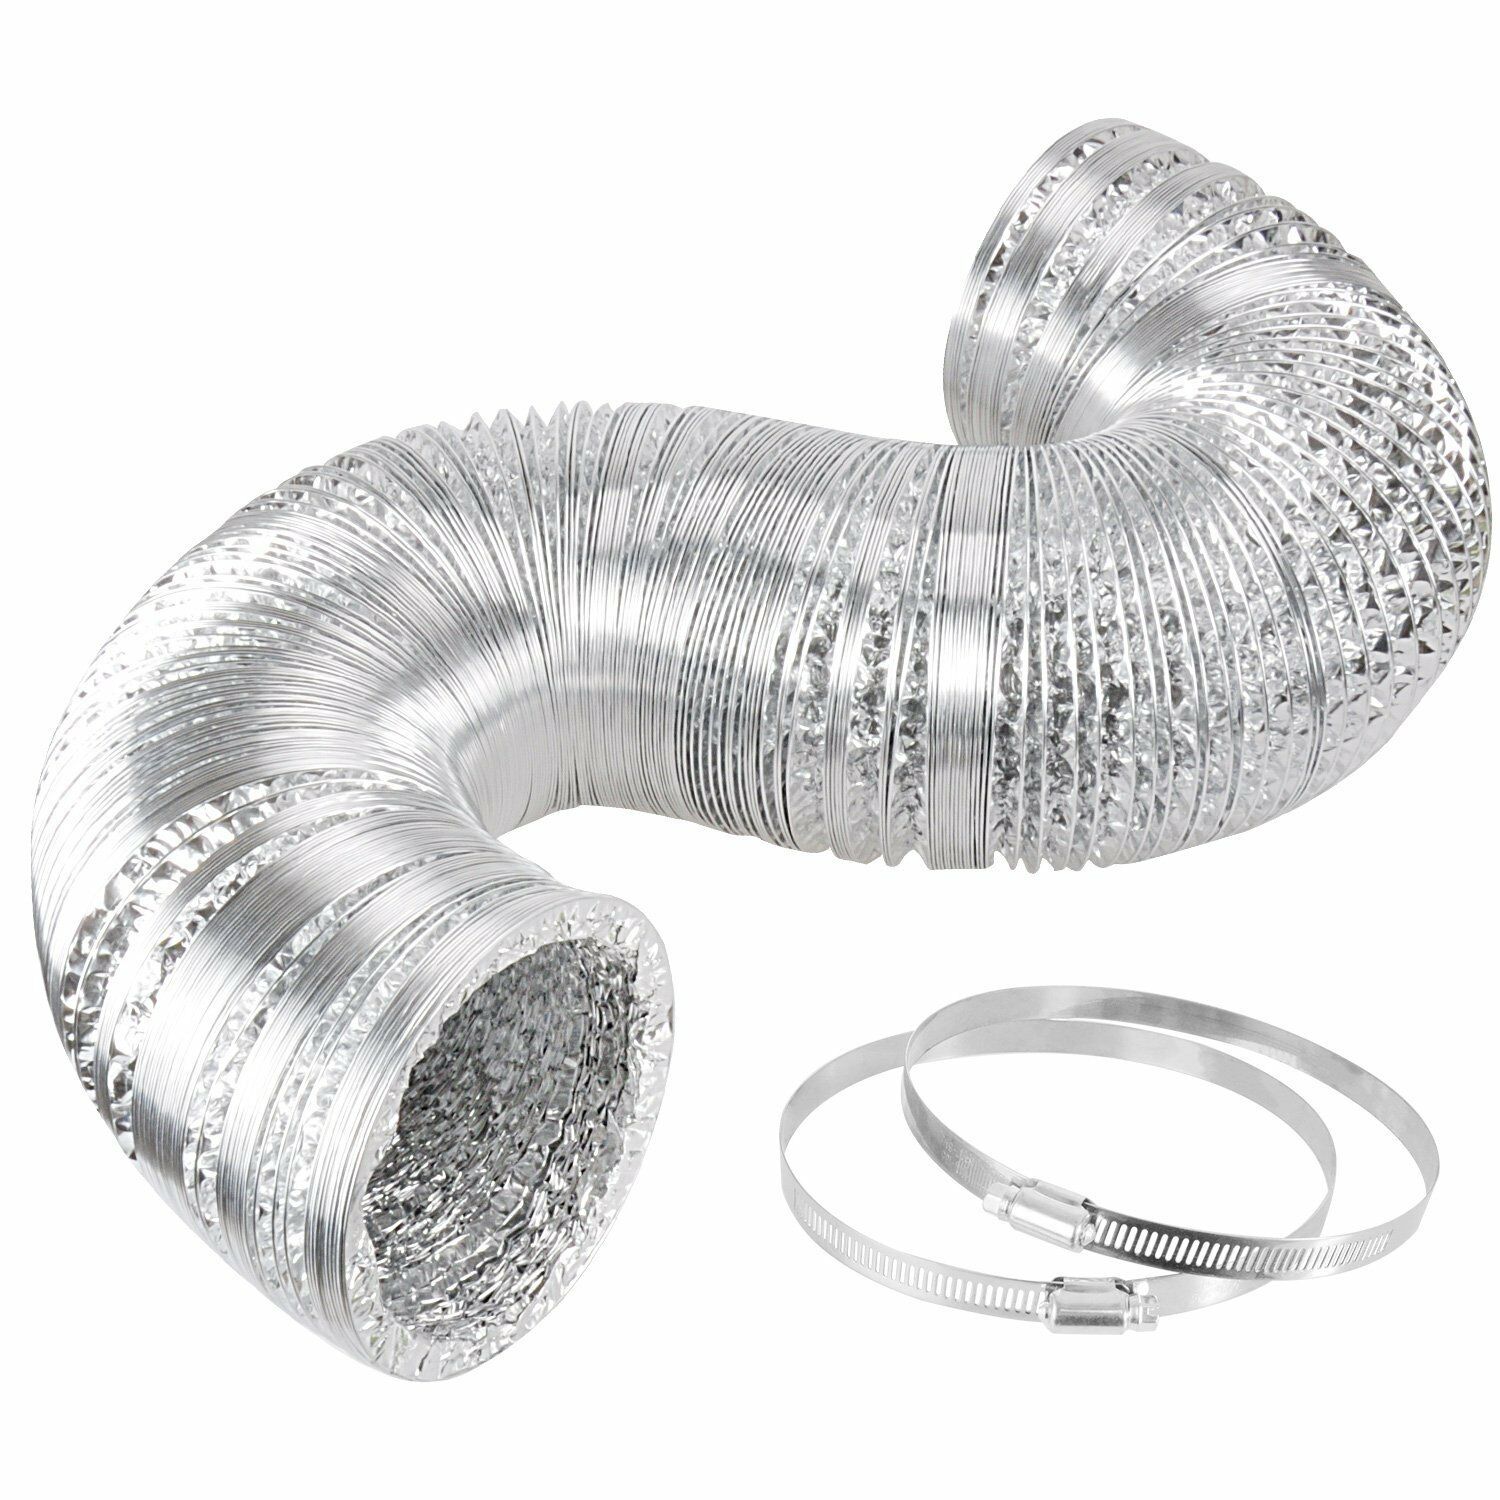 Ipower 4" 8 Feet Inch Non-insulated Aluminum Air Ventilation Ducting Vent Hose